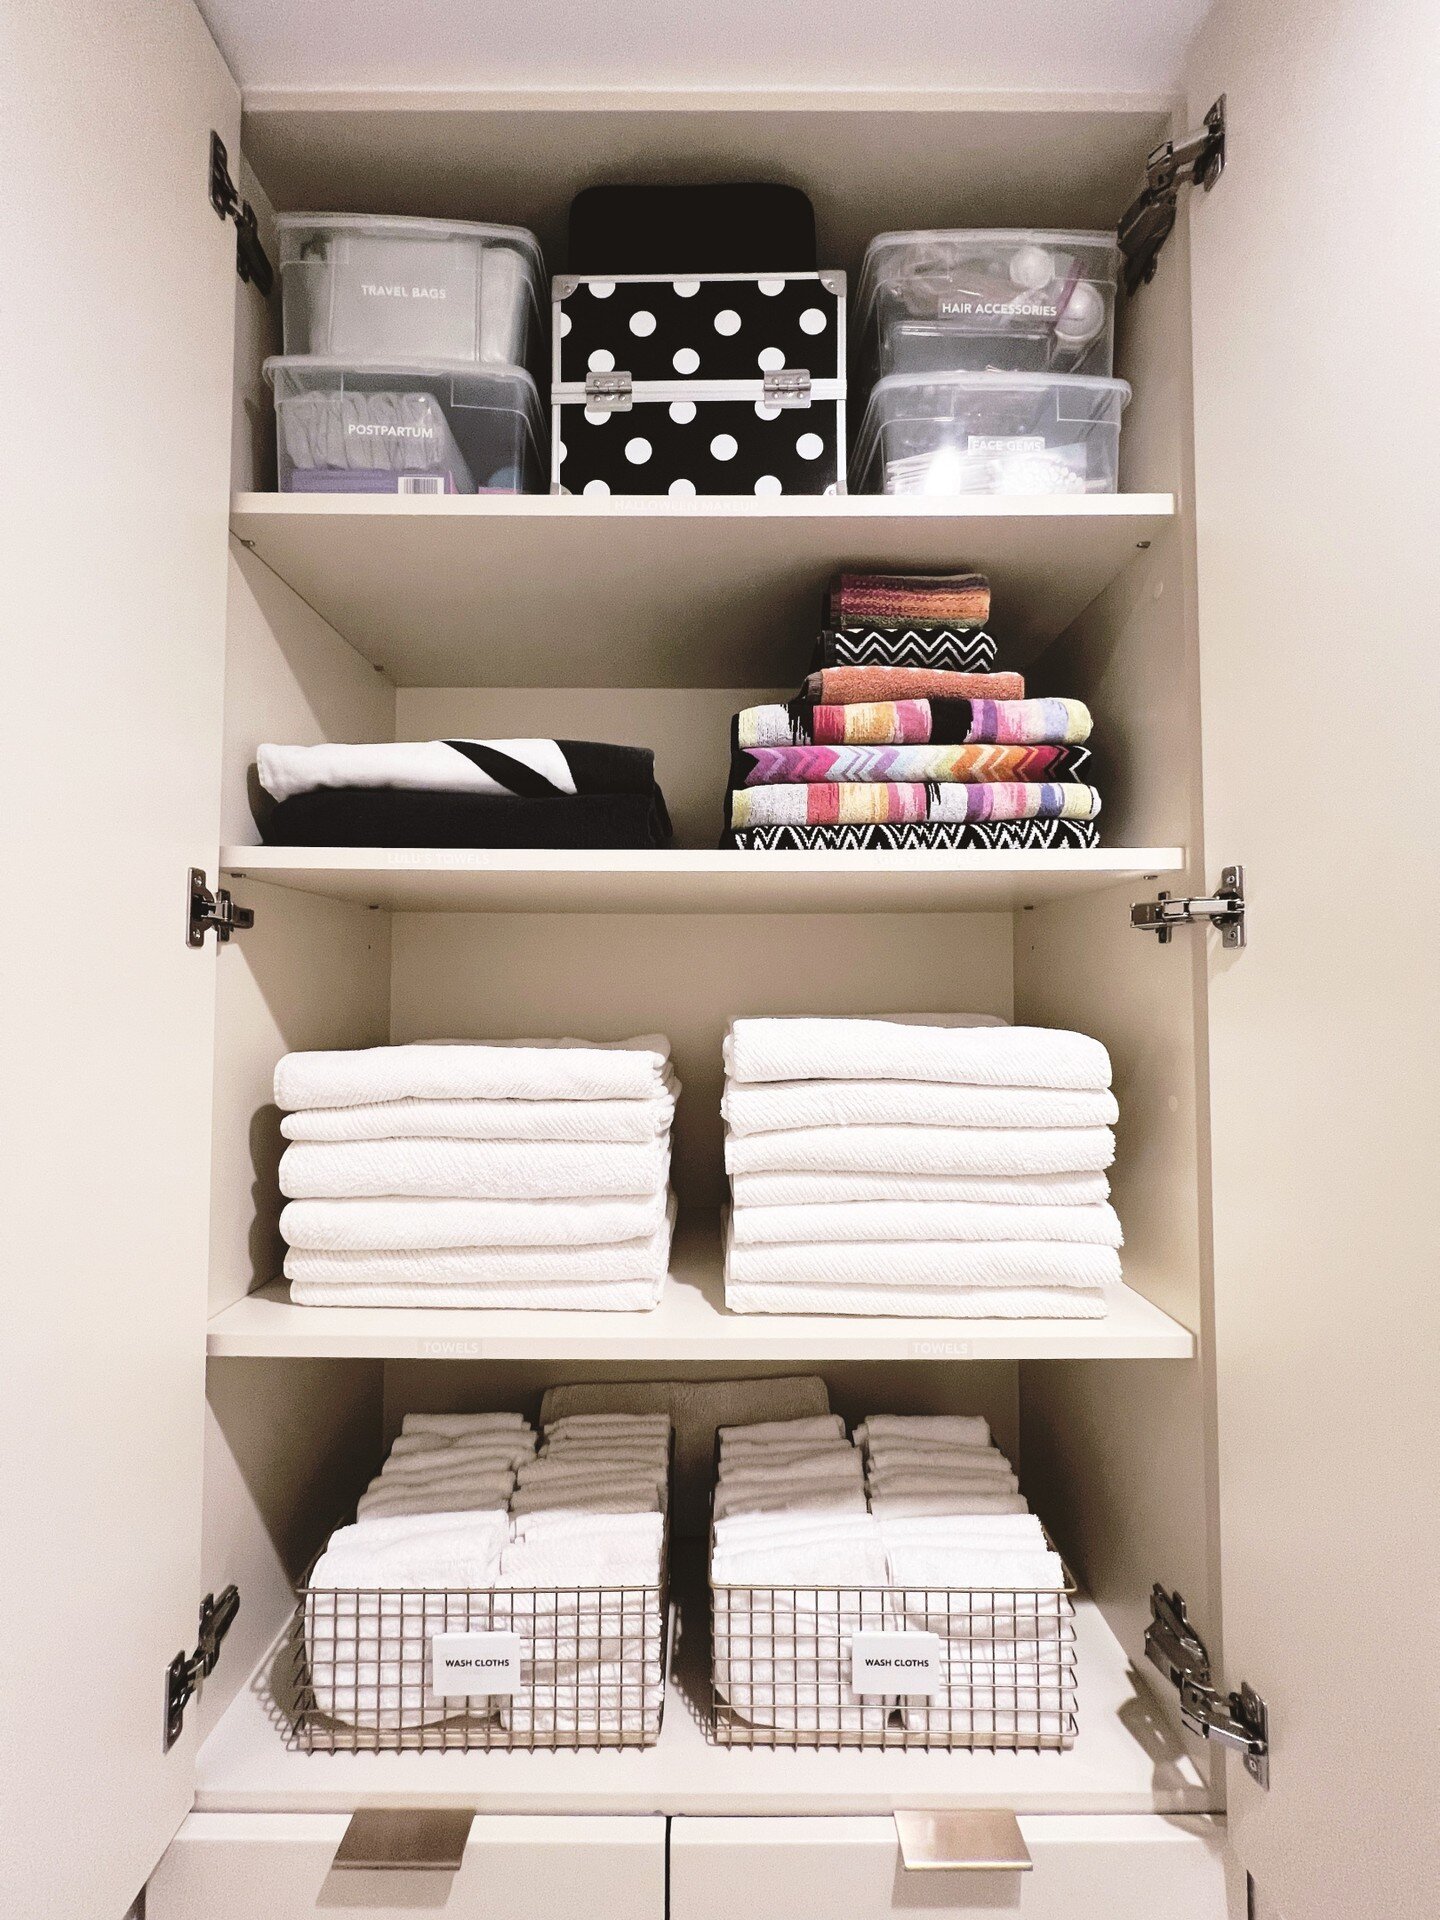 Time for a Linen Closet Update! 🧺 Give your space a practical makeover by clearing out what doesn't belong and checking for any worn towels &ndash; repurpose as rags or consider donating. 🤲✨

Refresh the closet with functional baskets to keep face 